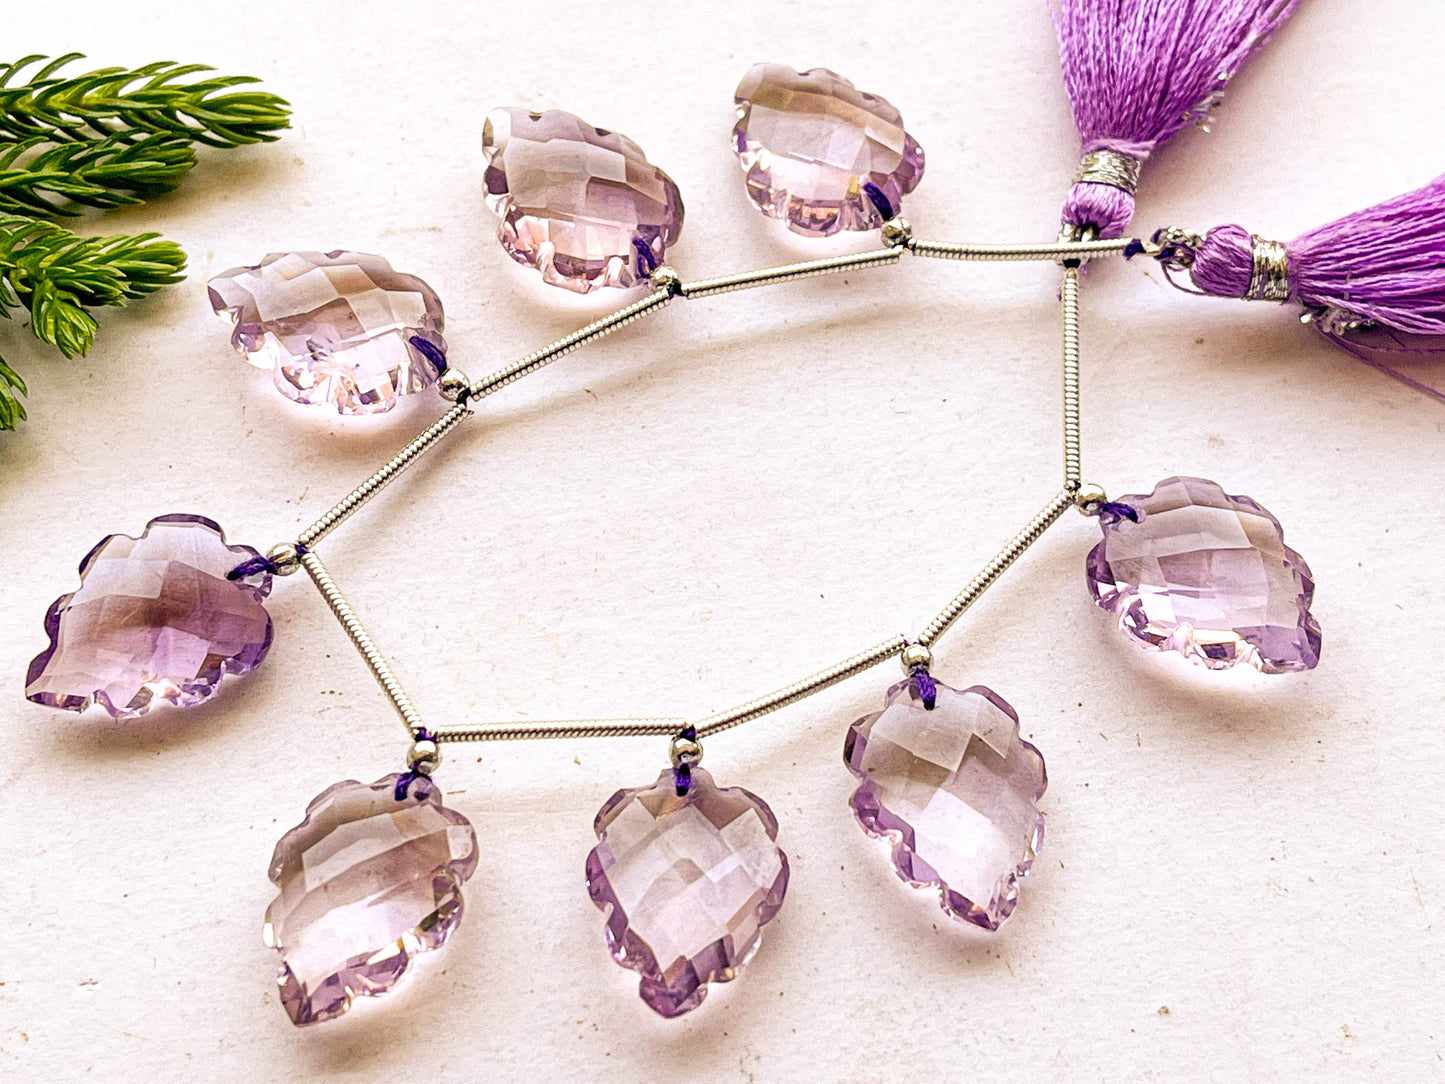 Pink Amethyst carved pear shape faceted beads, Amethyst carving Beads ,Natural Amethyst Gemstone, Amethyst Briolette, Amethyst Beads,13X17MM